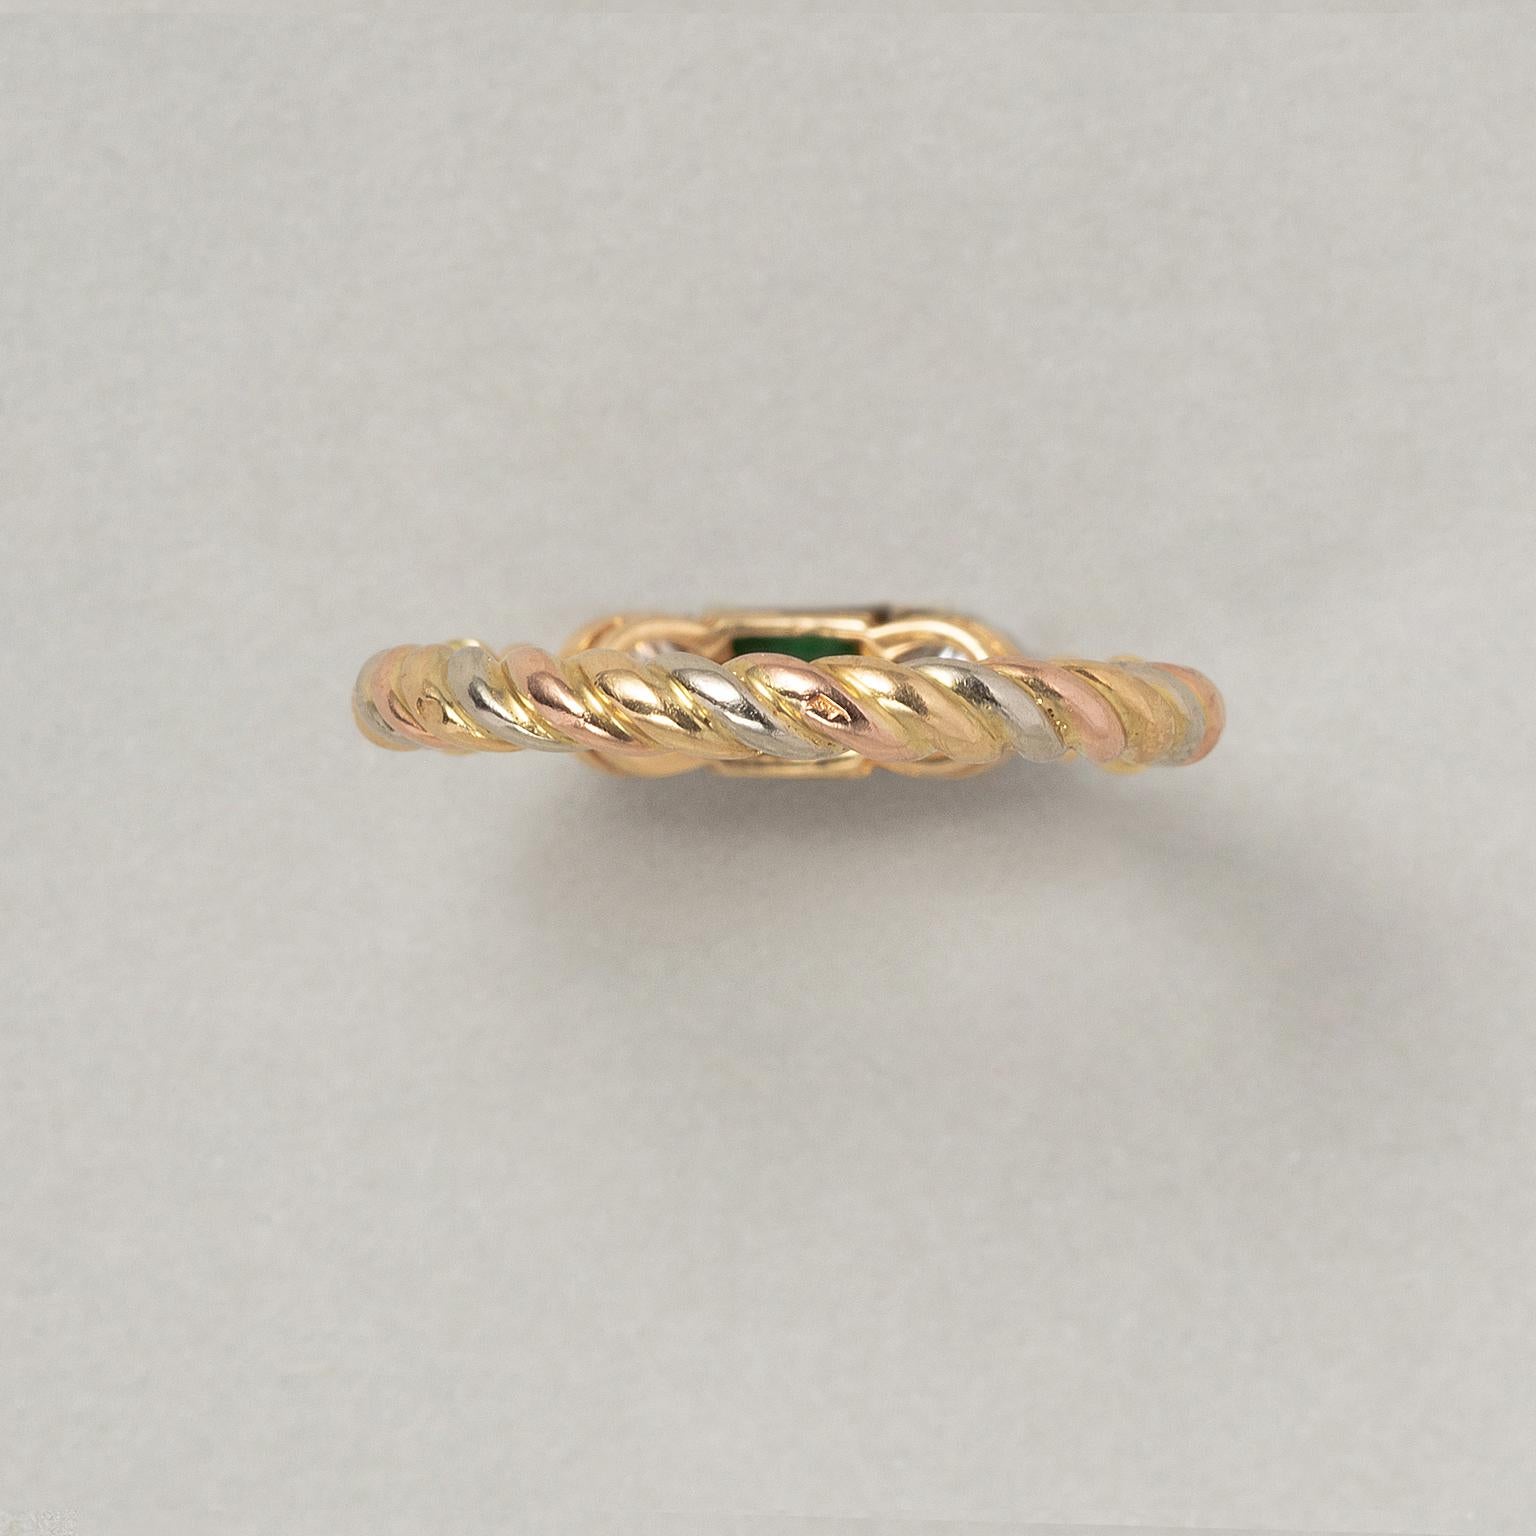 Brilliant Cut An 18 Carat Gold Cartier Three-Stone Ring with Diamond and Emerald